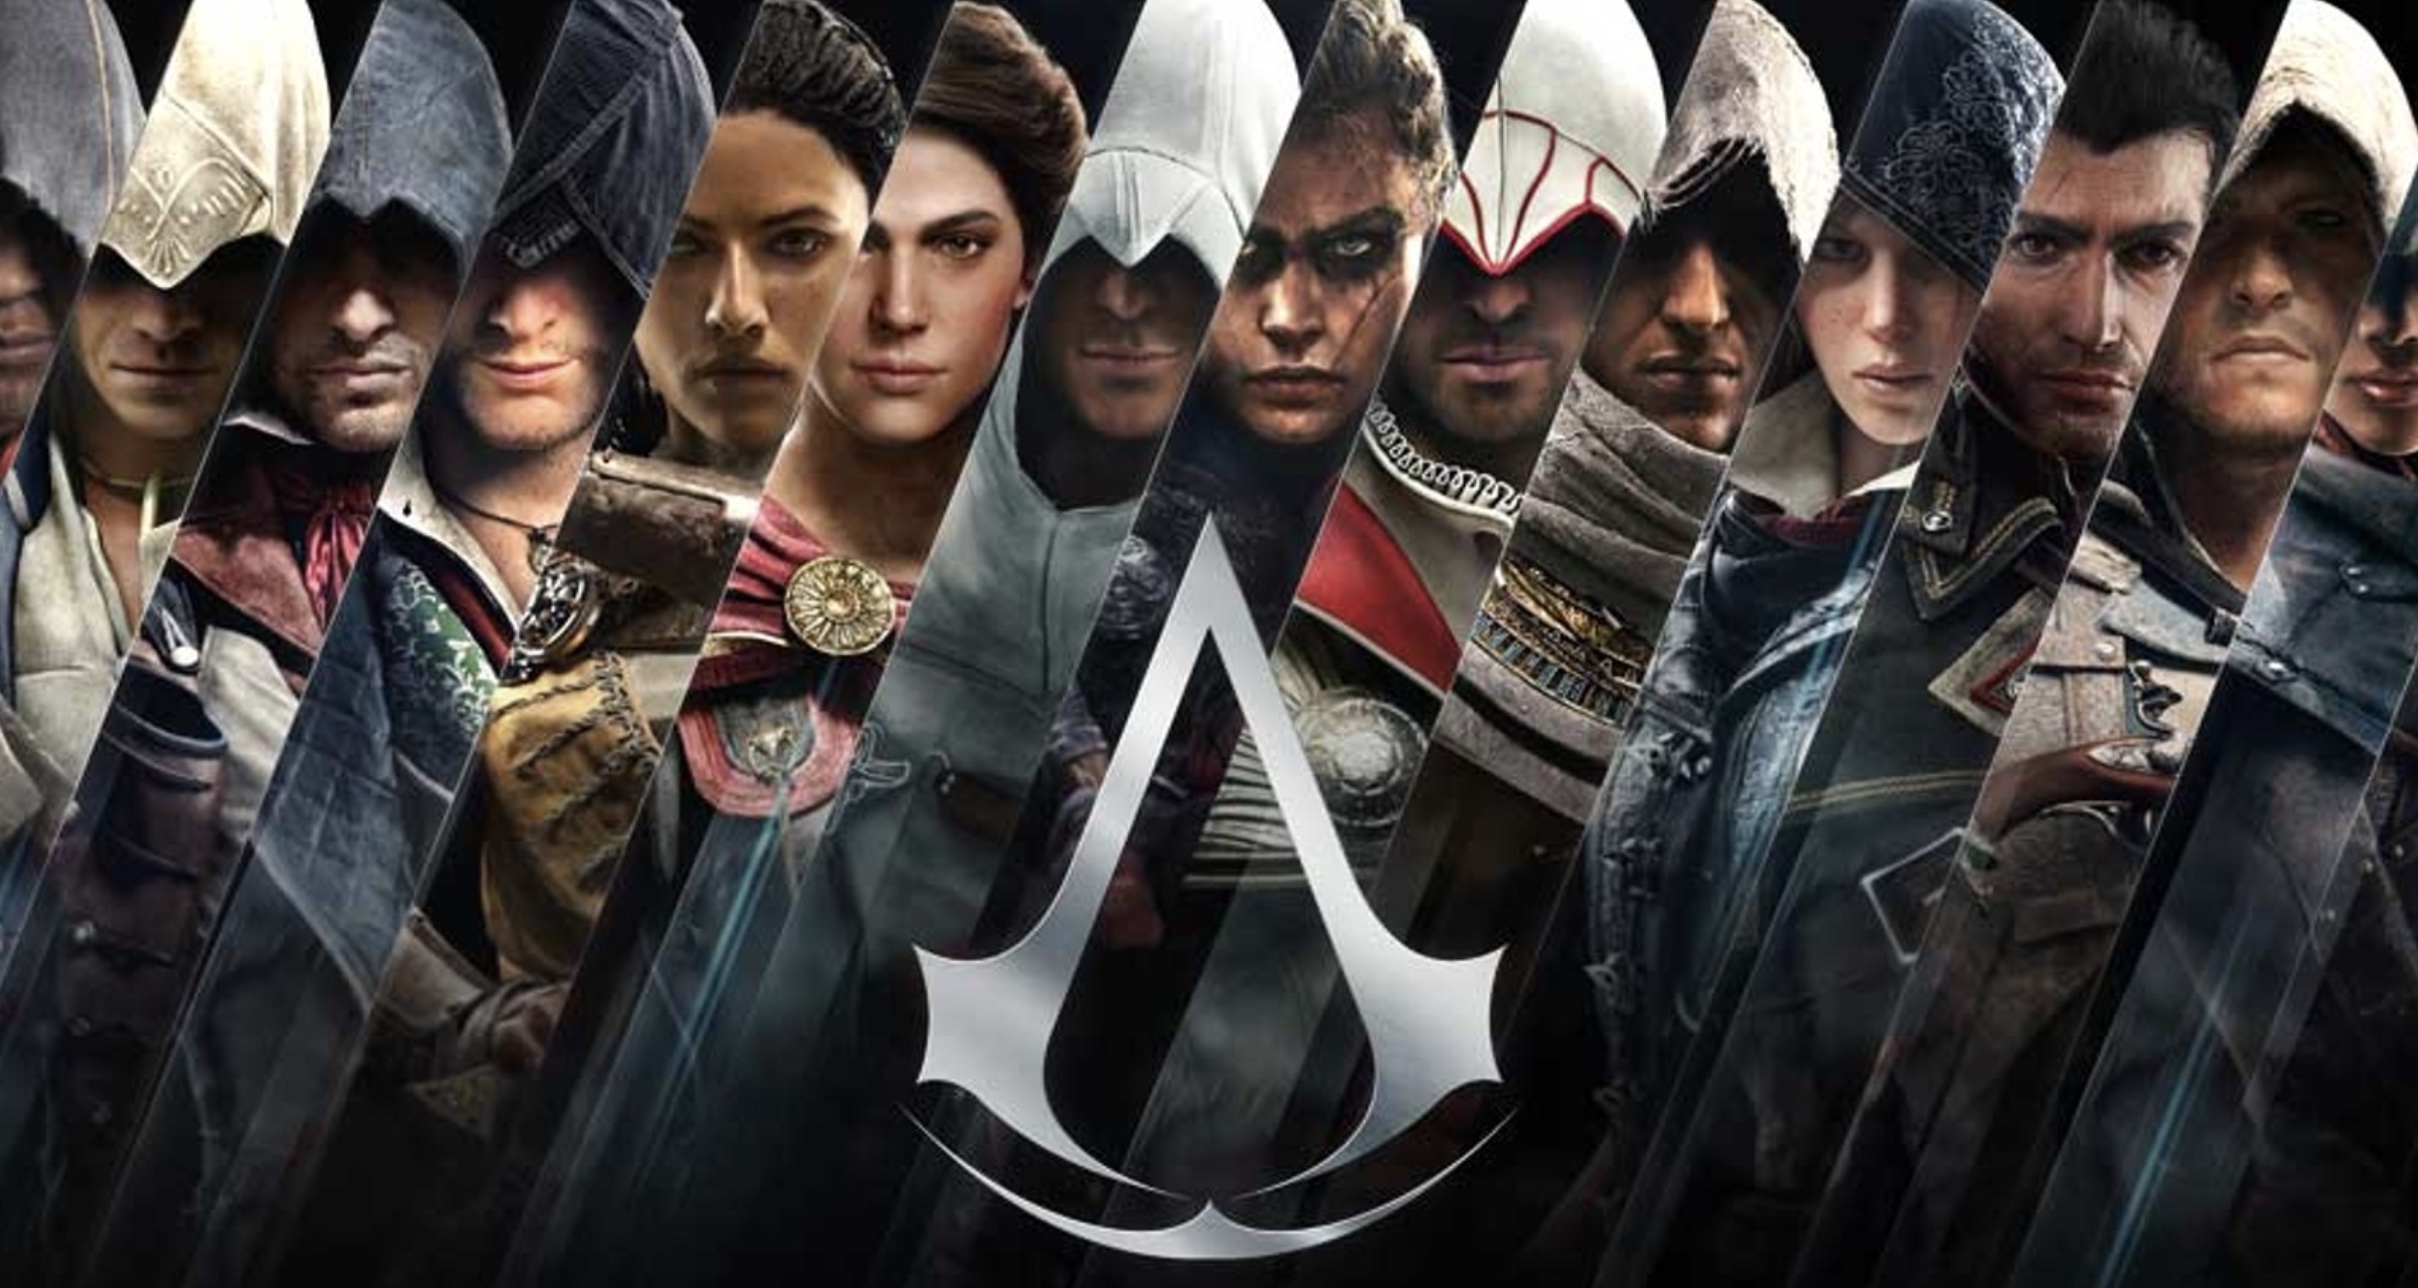 Assassin's Creed: after 13 years, 12 games and a ton of sales